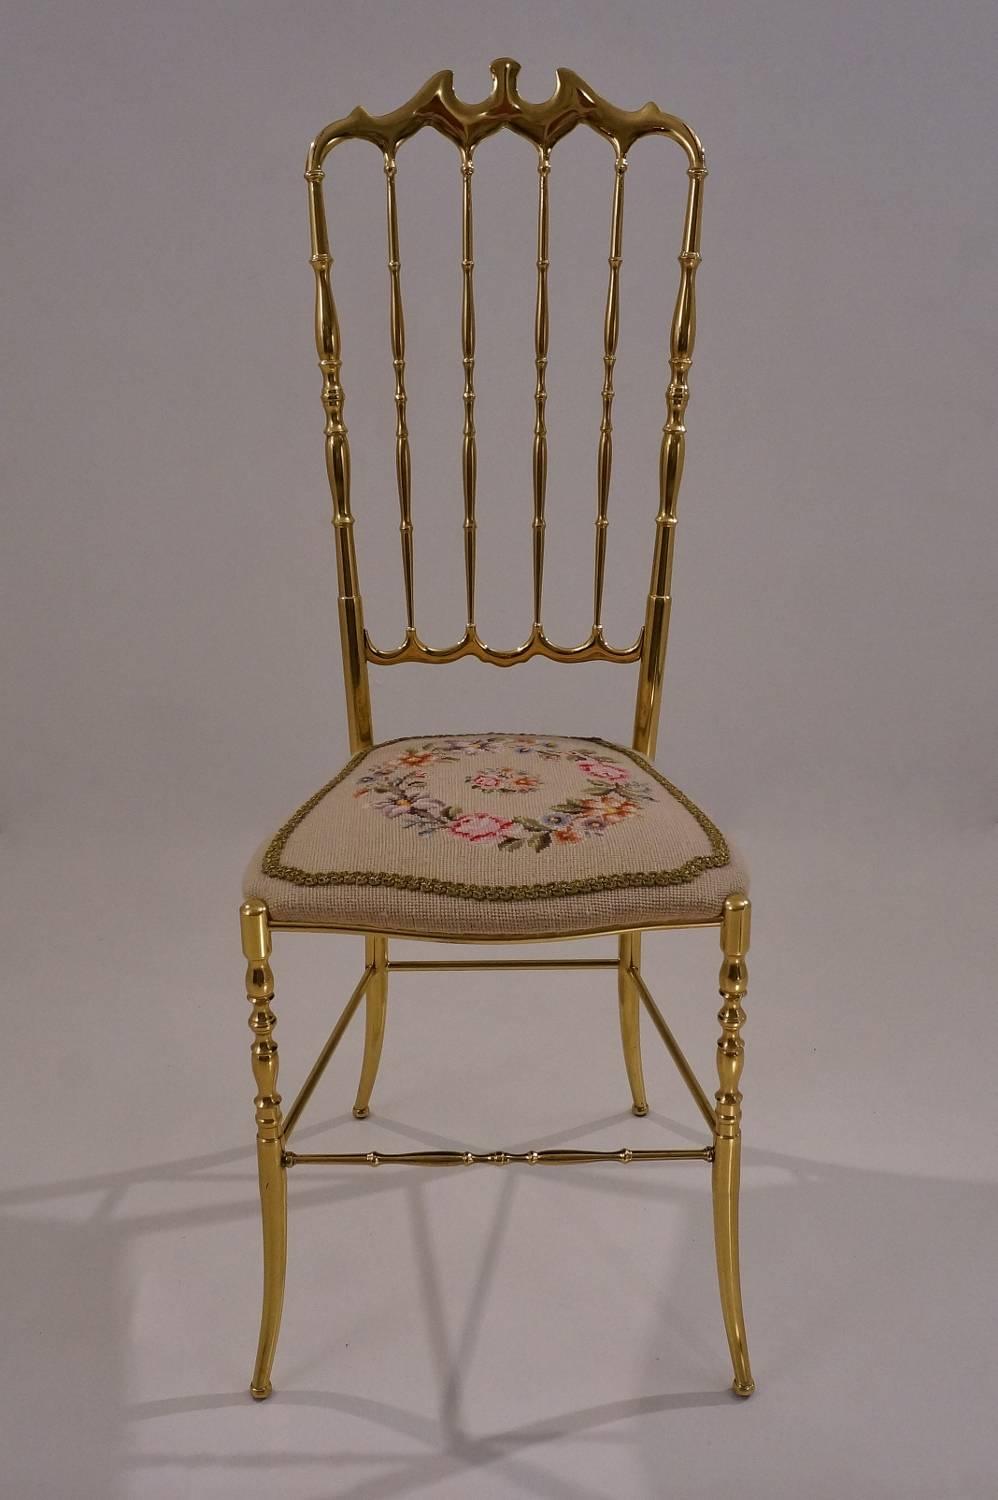 Chiavari brass chair, needle point seat with high back,1950`s ca, Italian.

This vintage chair has been thoroughly cleaned respecting the vintage patina; It is ready to use.

This elegant vintage Chiavari chair is in solid brass and has a unique